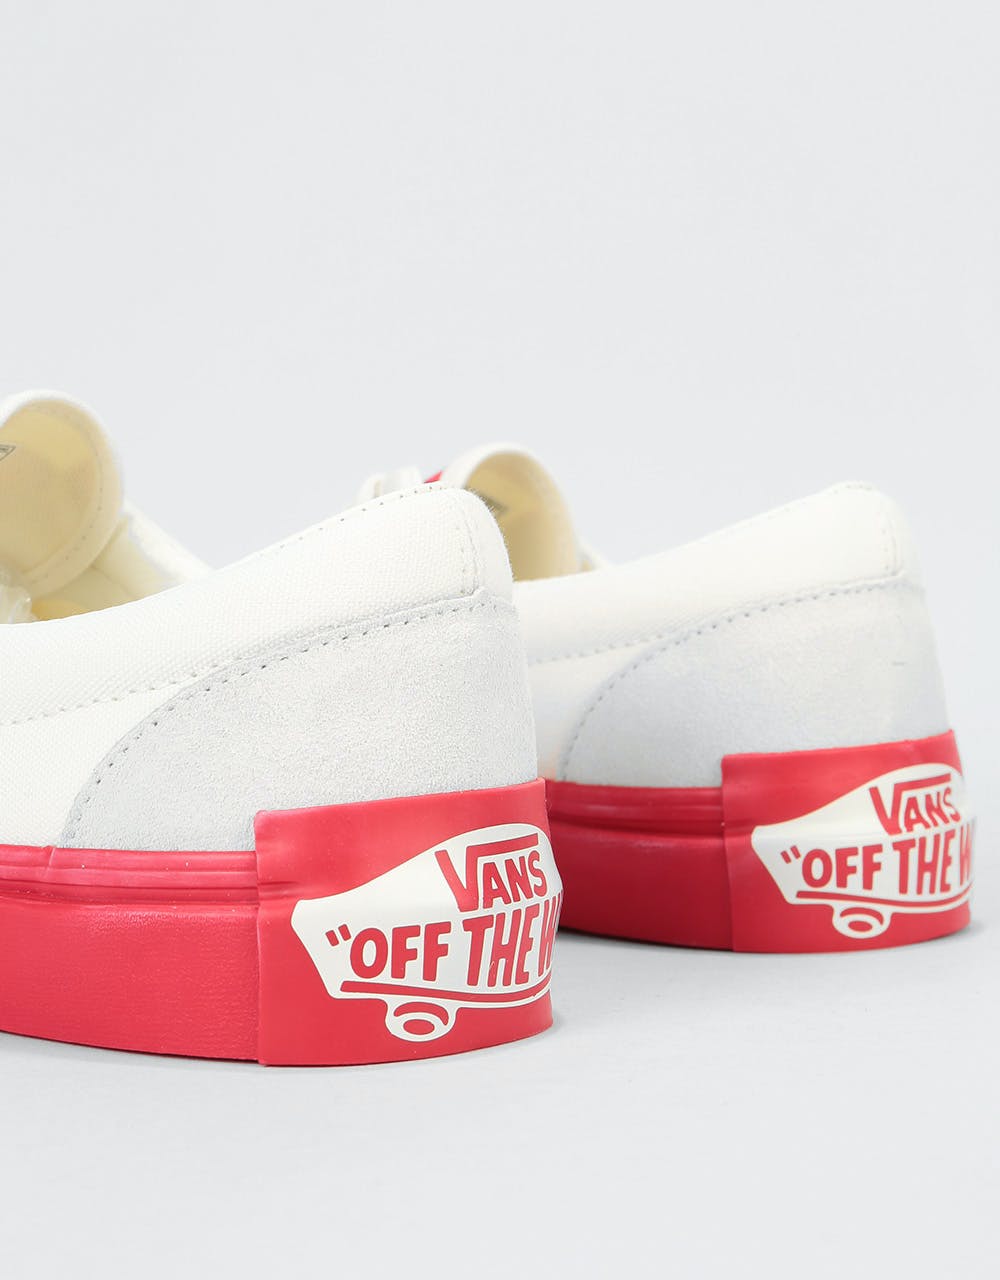 Vans Era Skate Shoes - (Y.O.P.Purlicue) Marshmallow/Racing Red